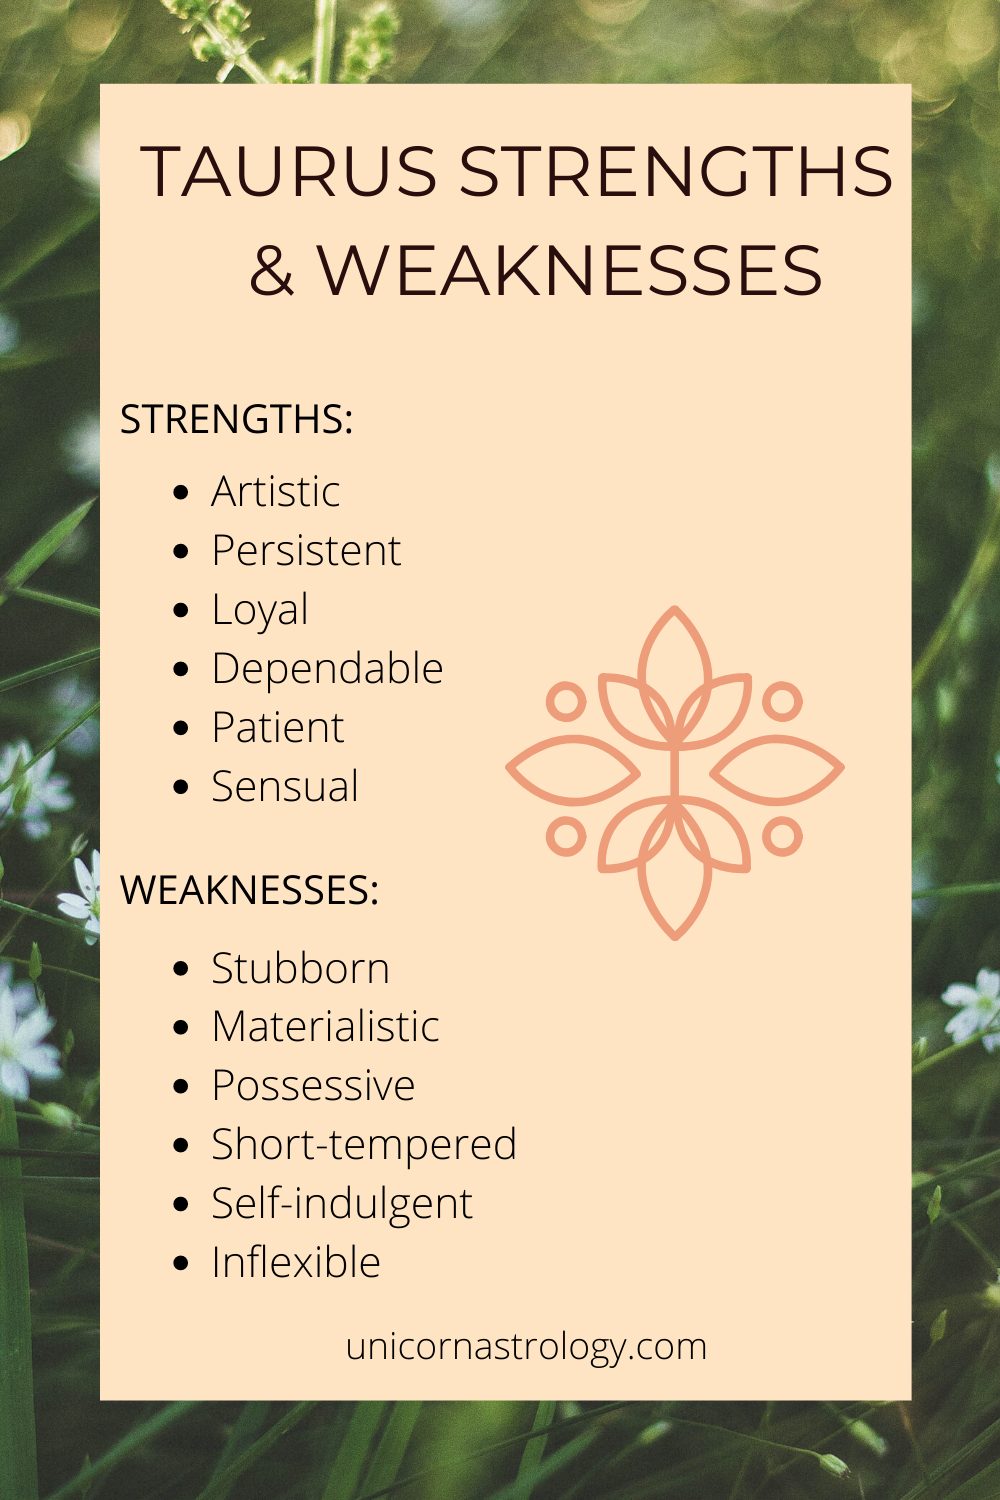 Strengths And Weaknesses Of Taurus